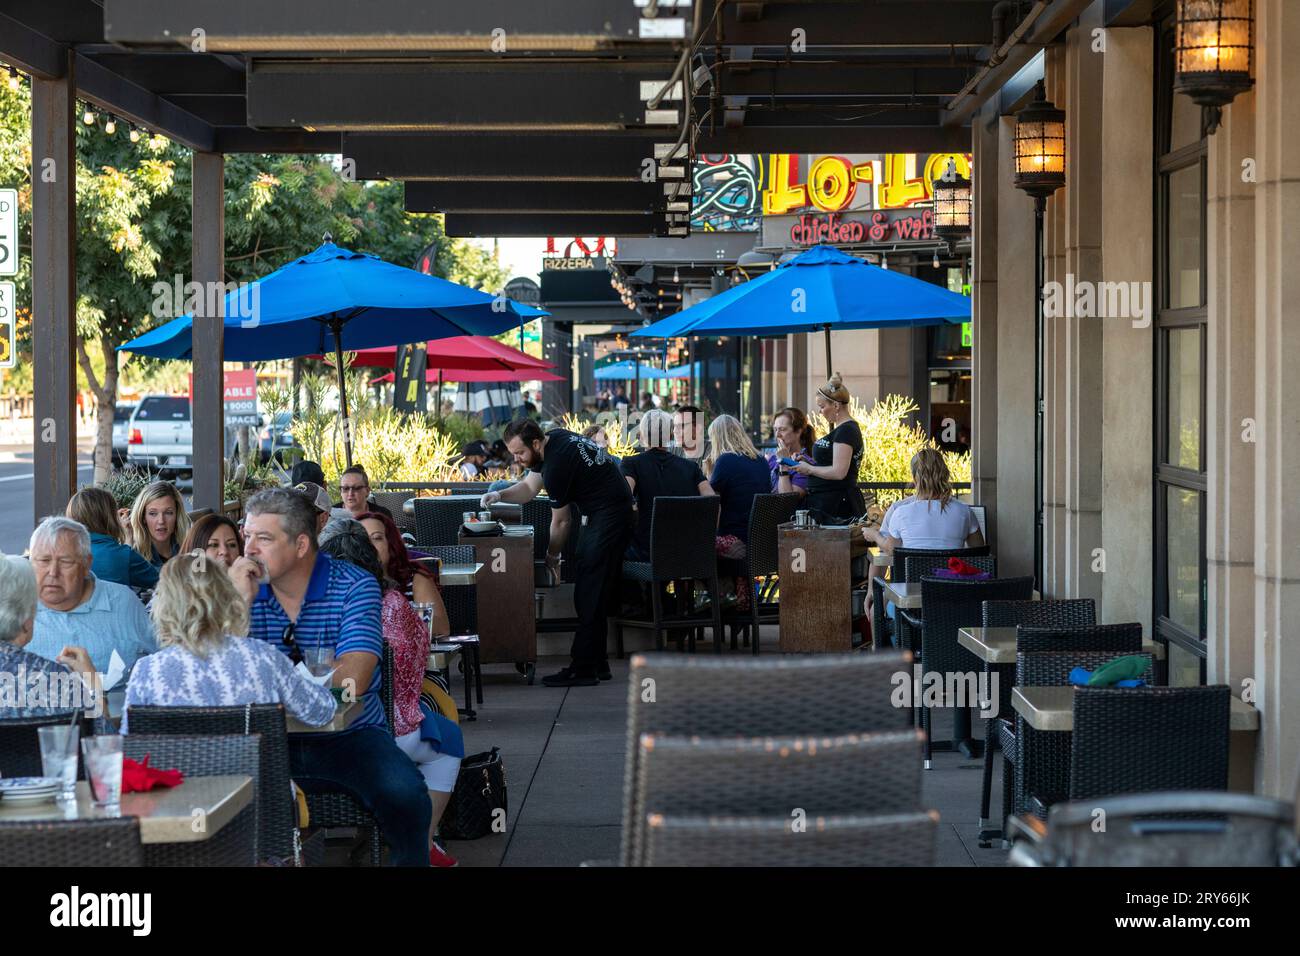 Restaurant patio on busy street with diners Stock Photo